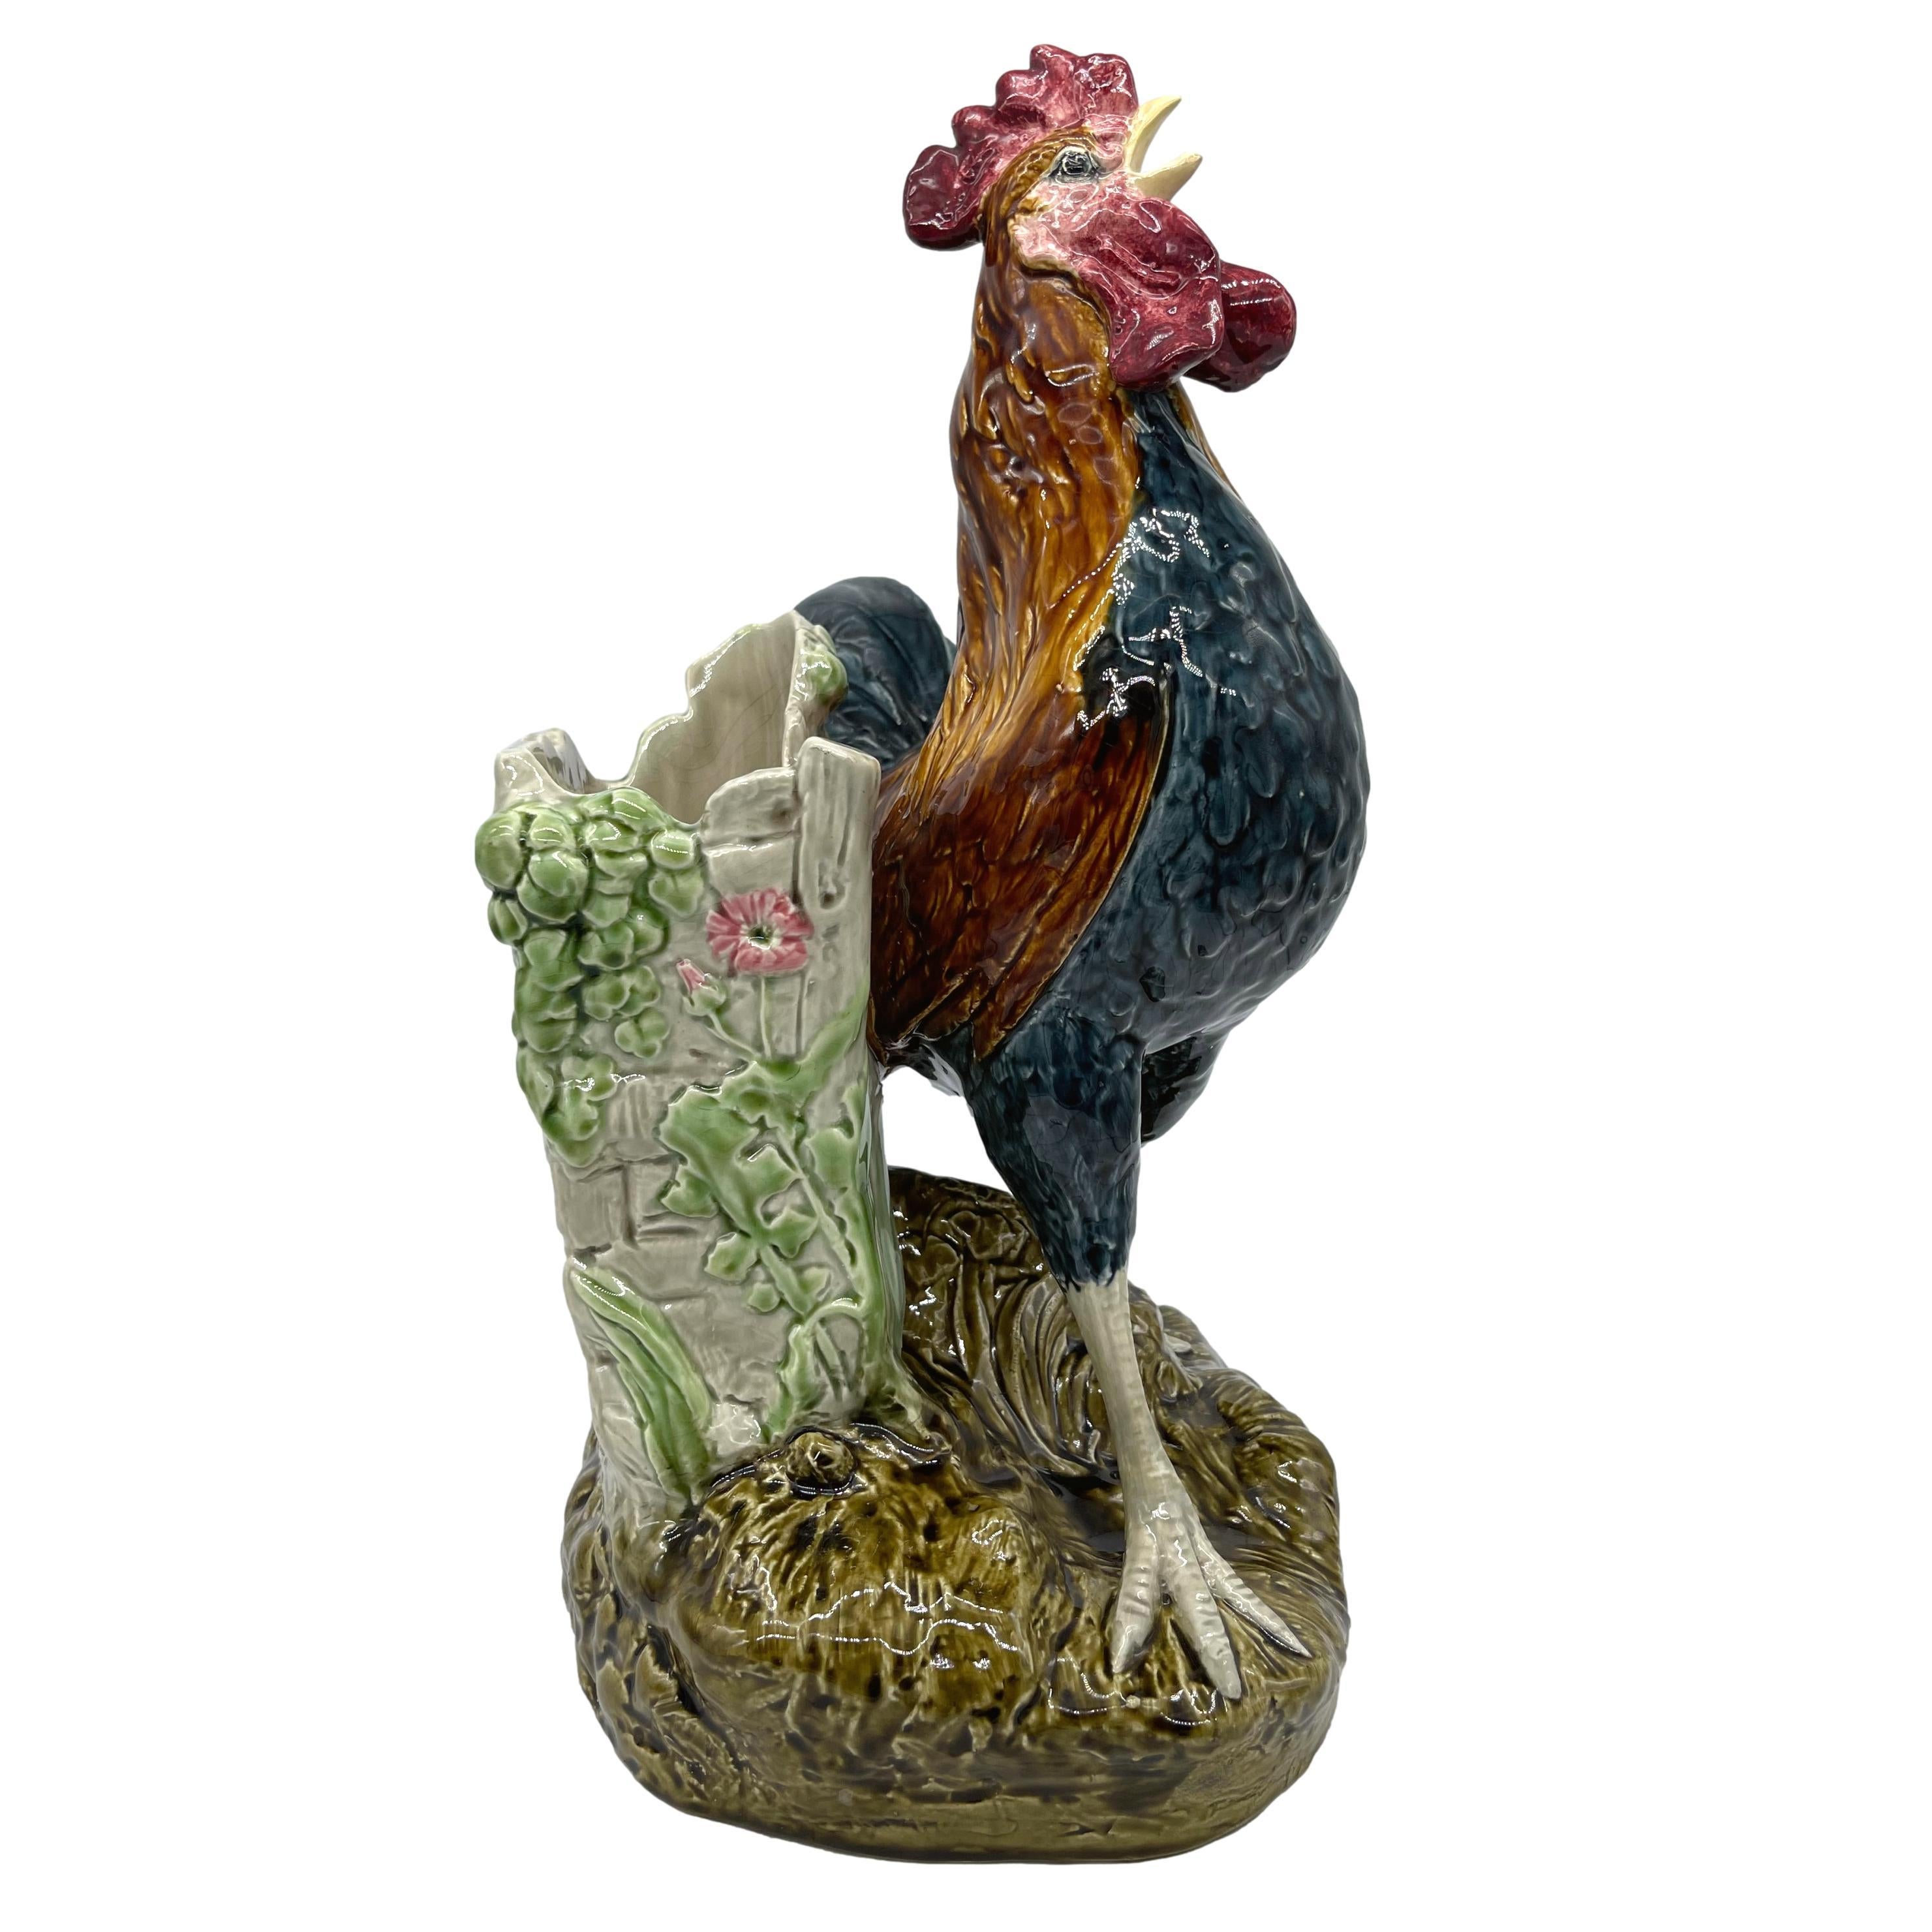 Molded Majolica Rooster Large Spill Vase Signed Louis Carrier-Belleuse, French, ca 1890 For Sale